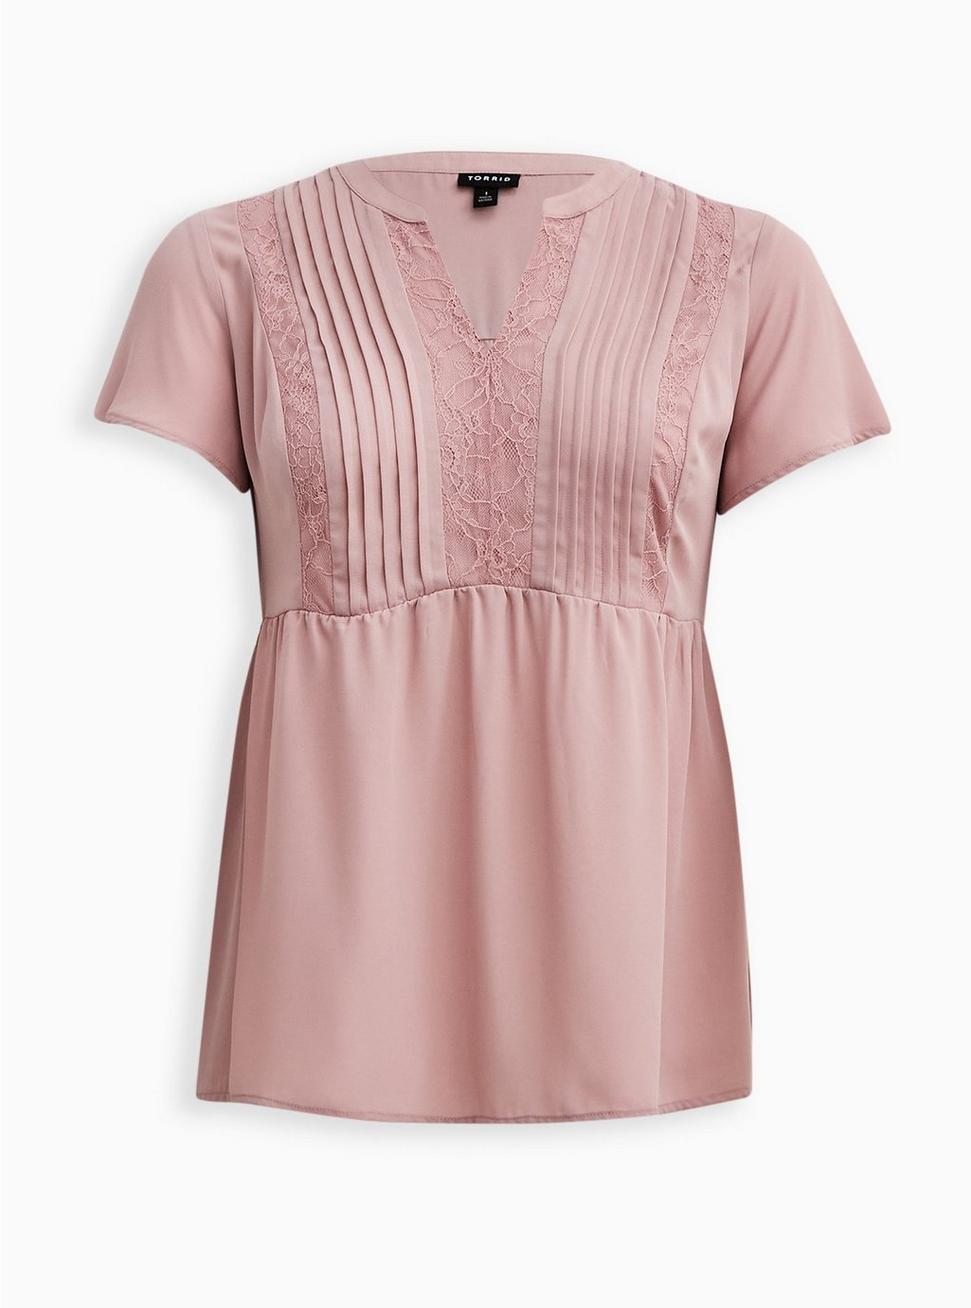 Peplum Georgette With Lace Trim And Pintucks Blouse, BLUSH, hi-res